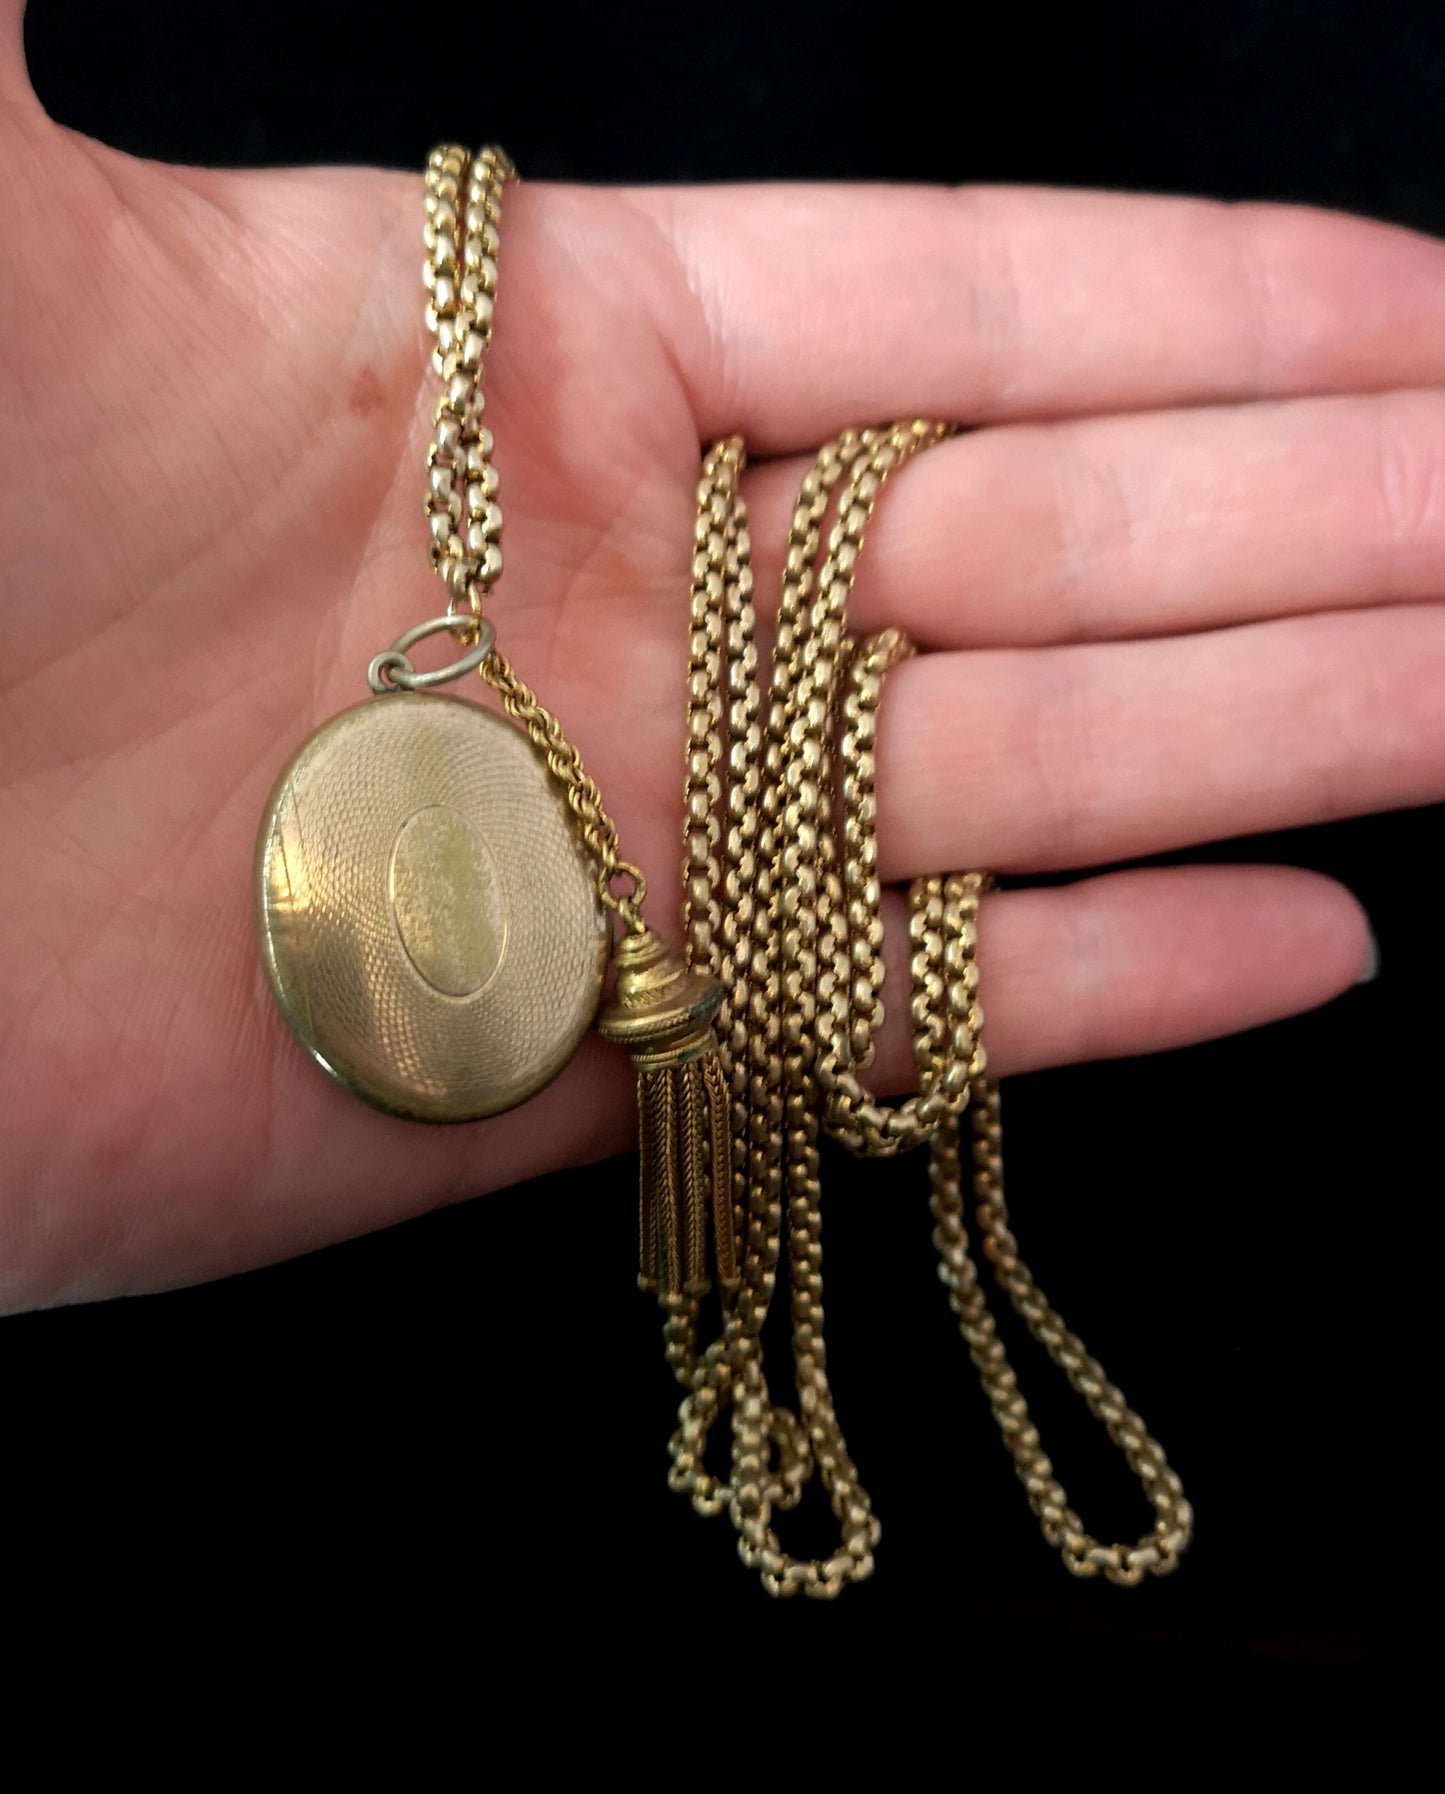 Antique Victorian longuard chain, muff chain necklace, locket and tassle